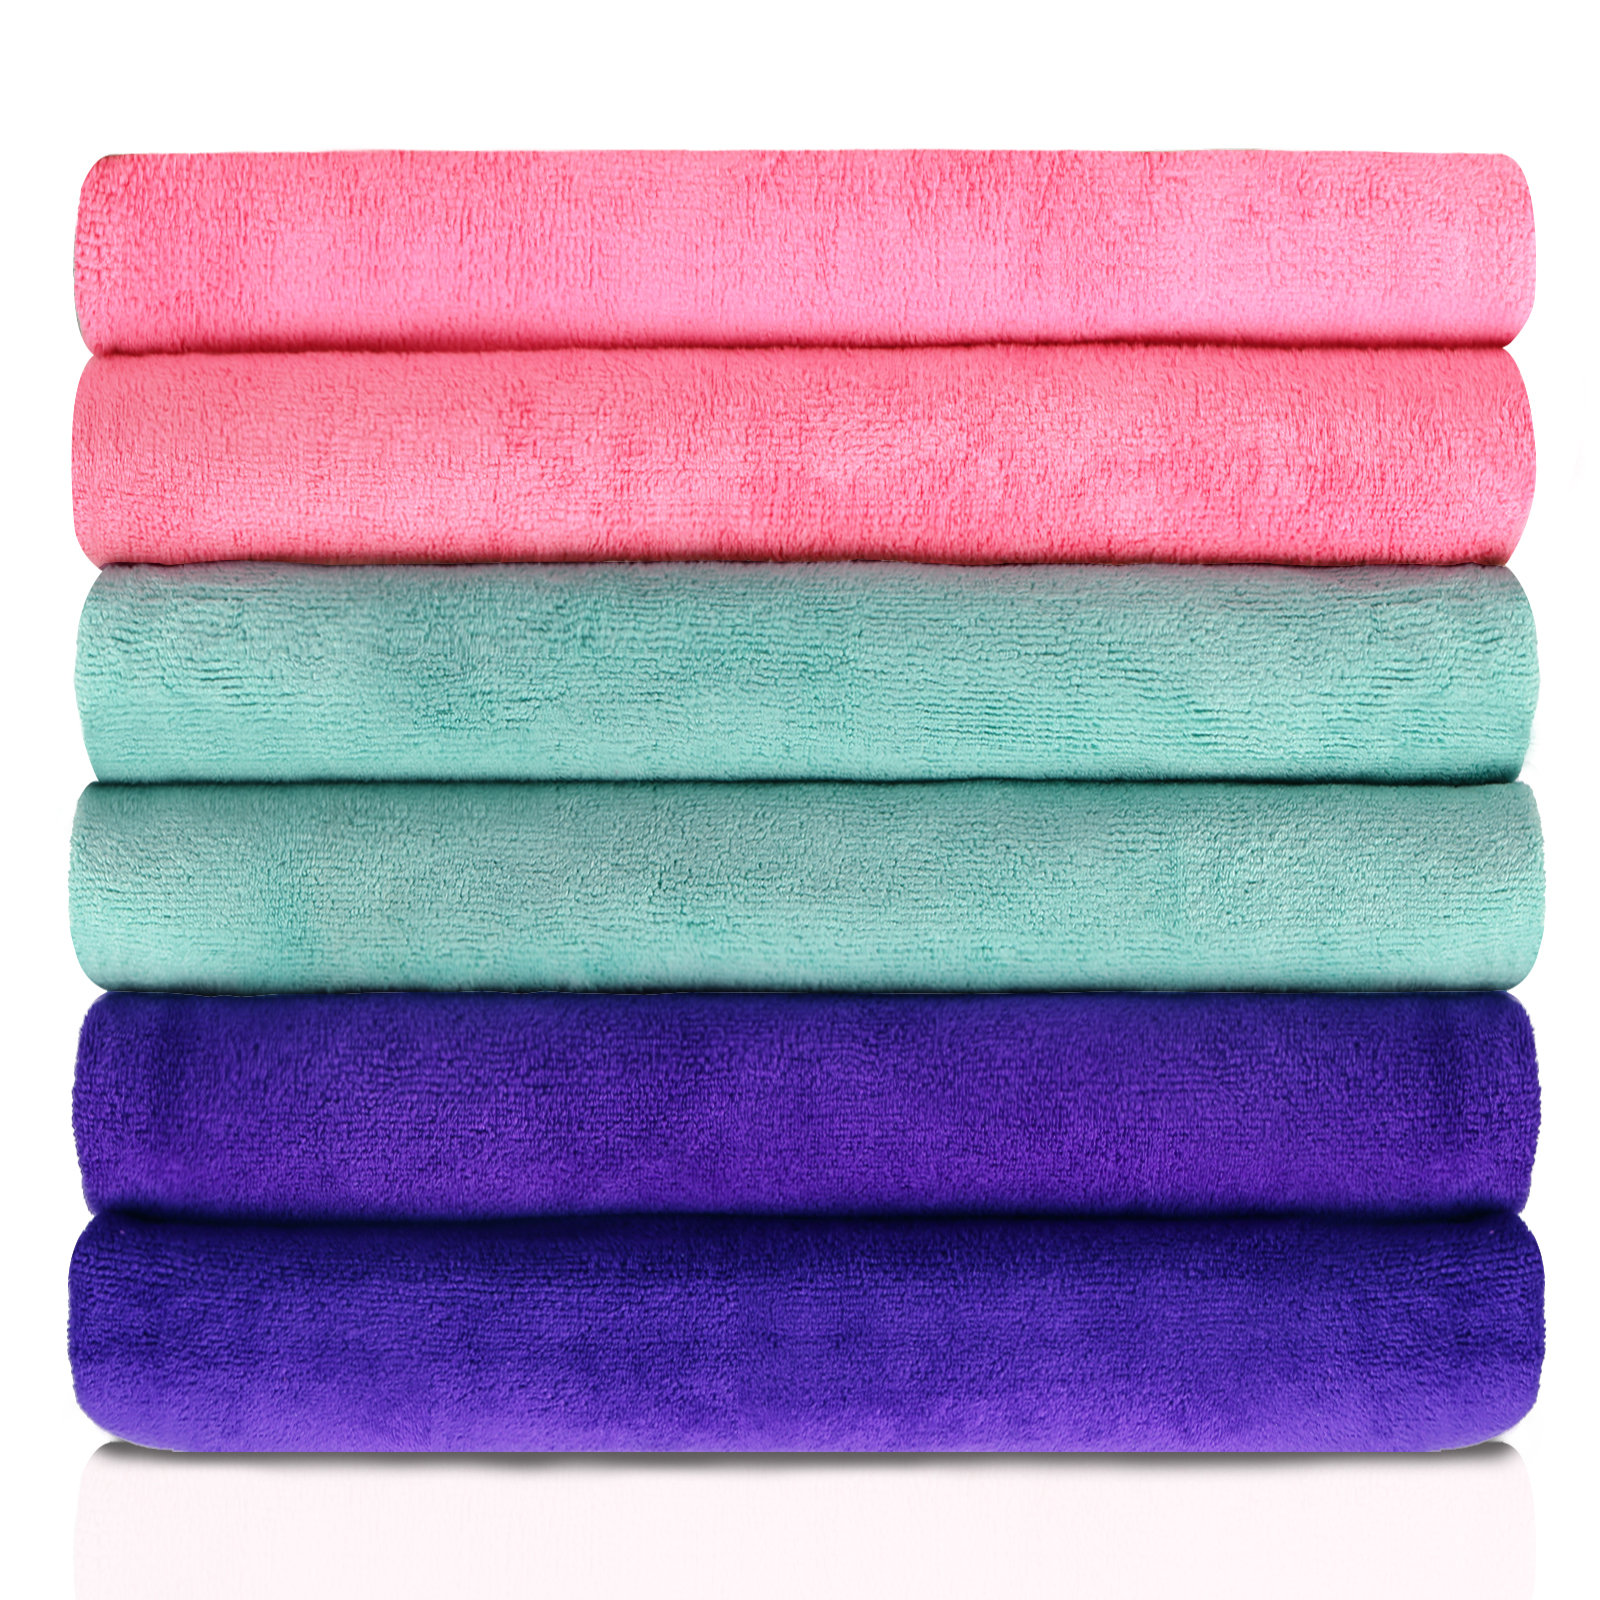 ECO Towels 6-Pack Bath Towels - Extra-Absorbent - 100% Cotton